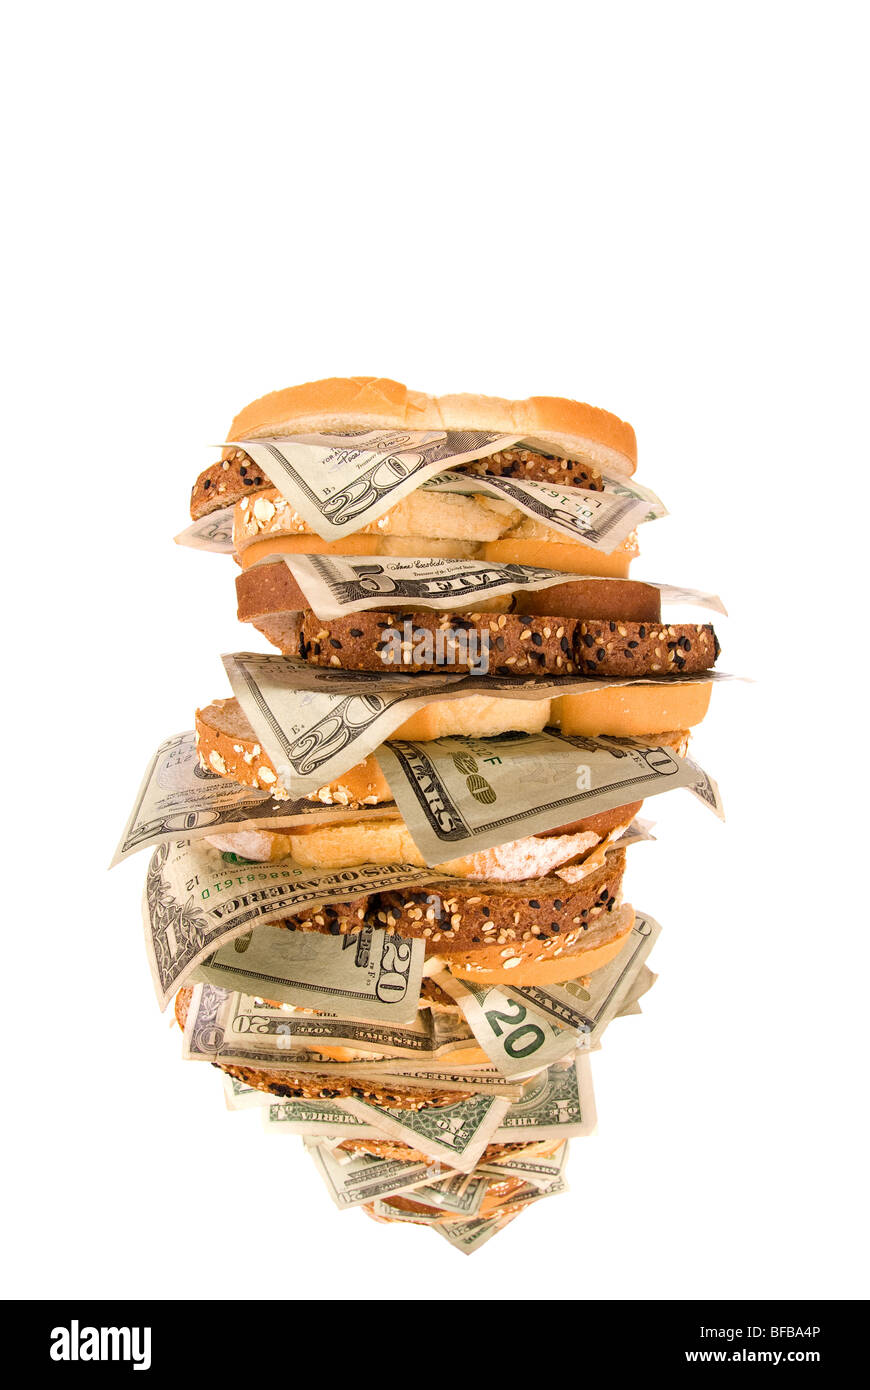 A money sandwich isolated on a white background. Infers how fast money can be eaten up. Stock Photo